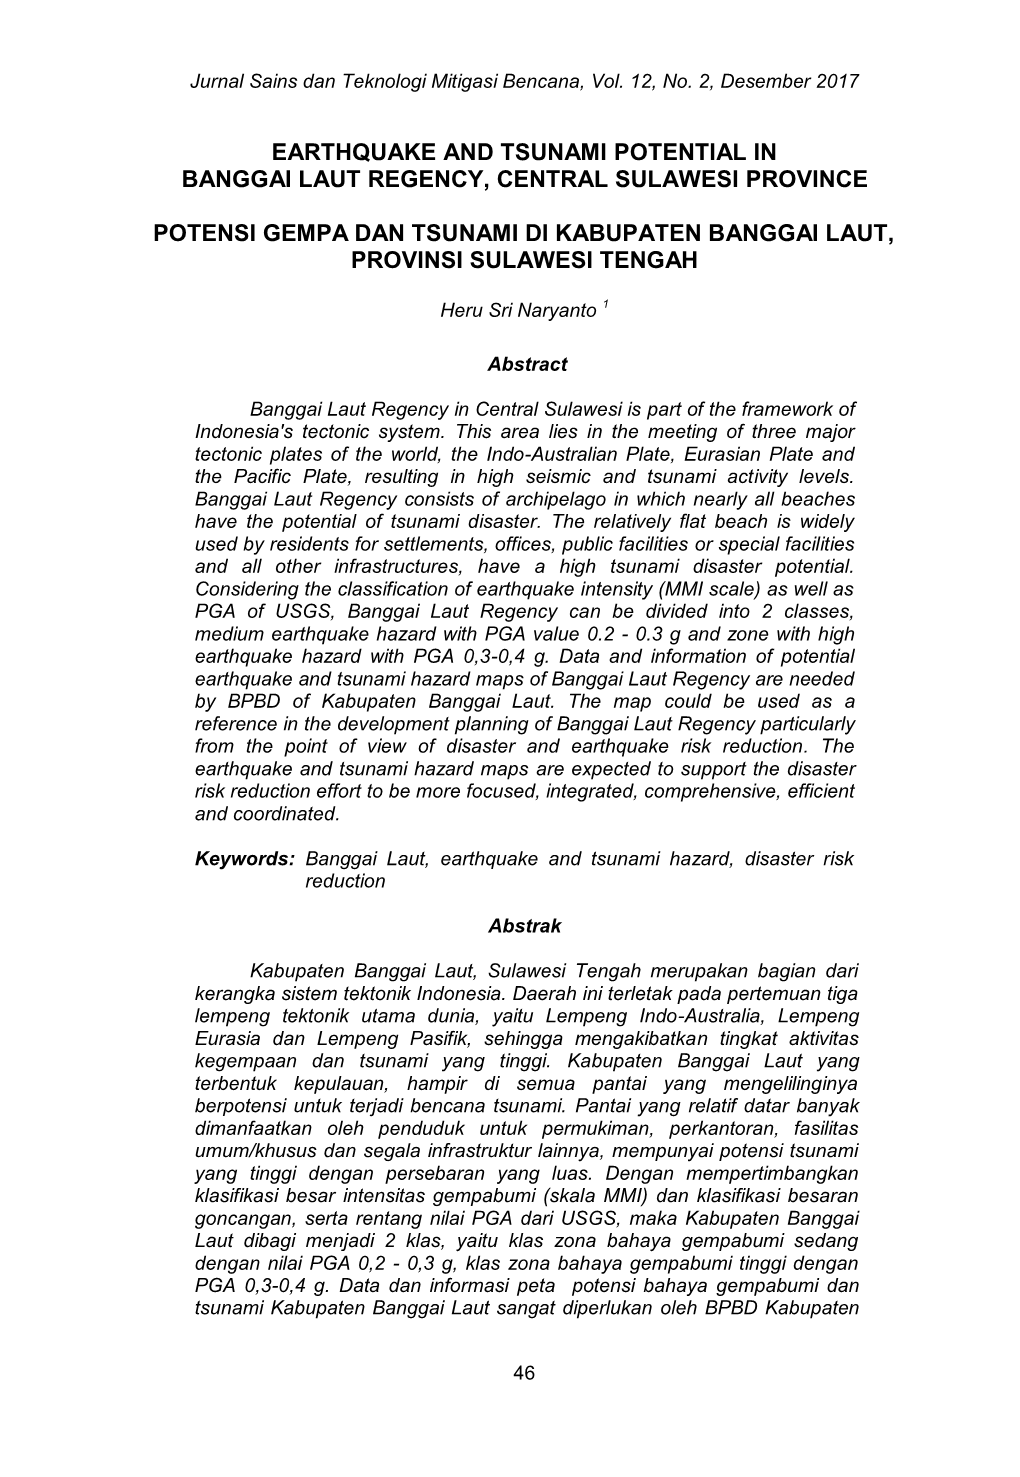 Earthquake and Tsunami Potential in Banggai Laut Regency, Central Sulawesi Province